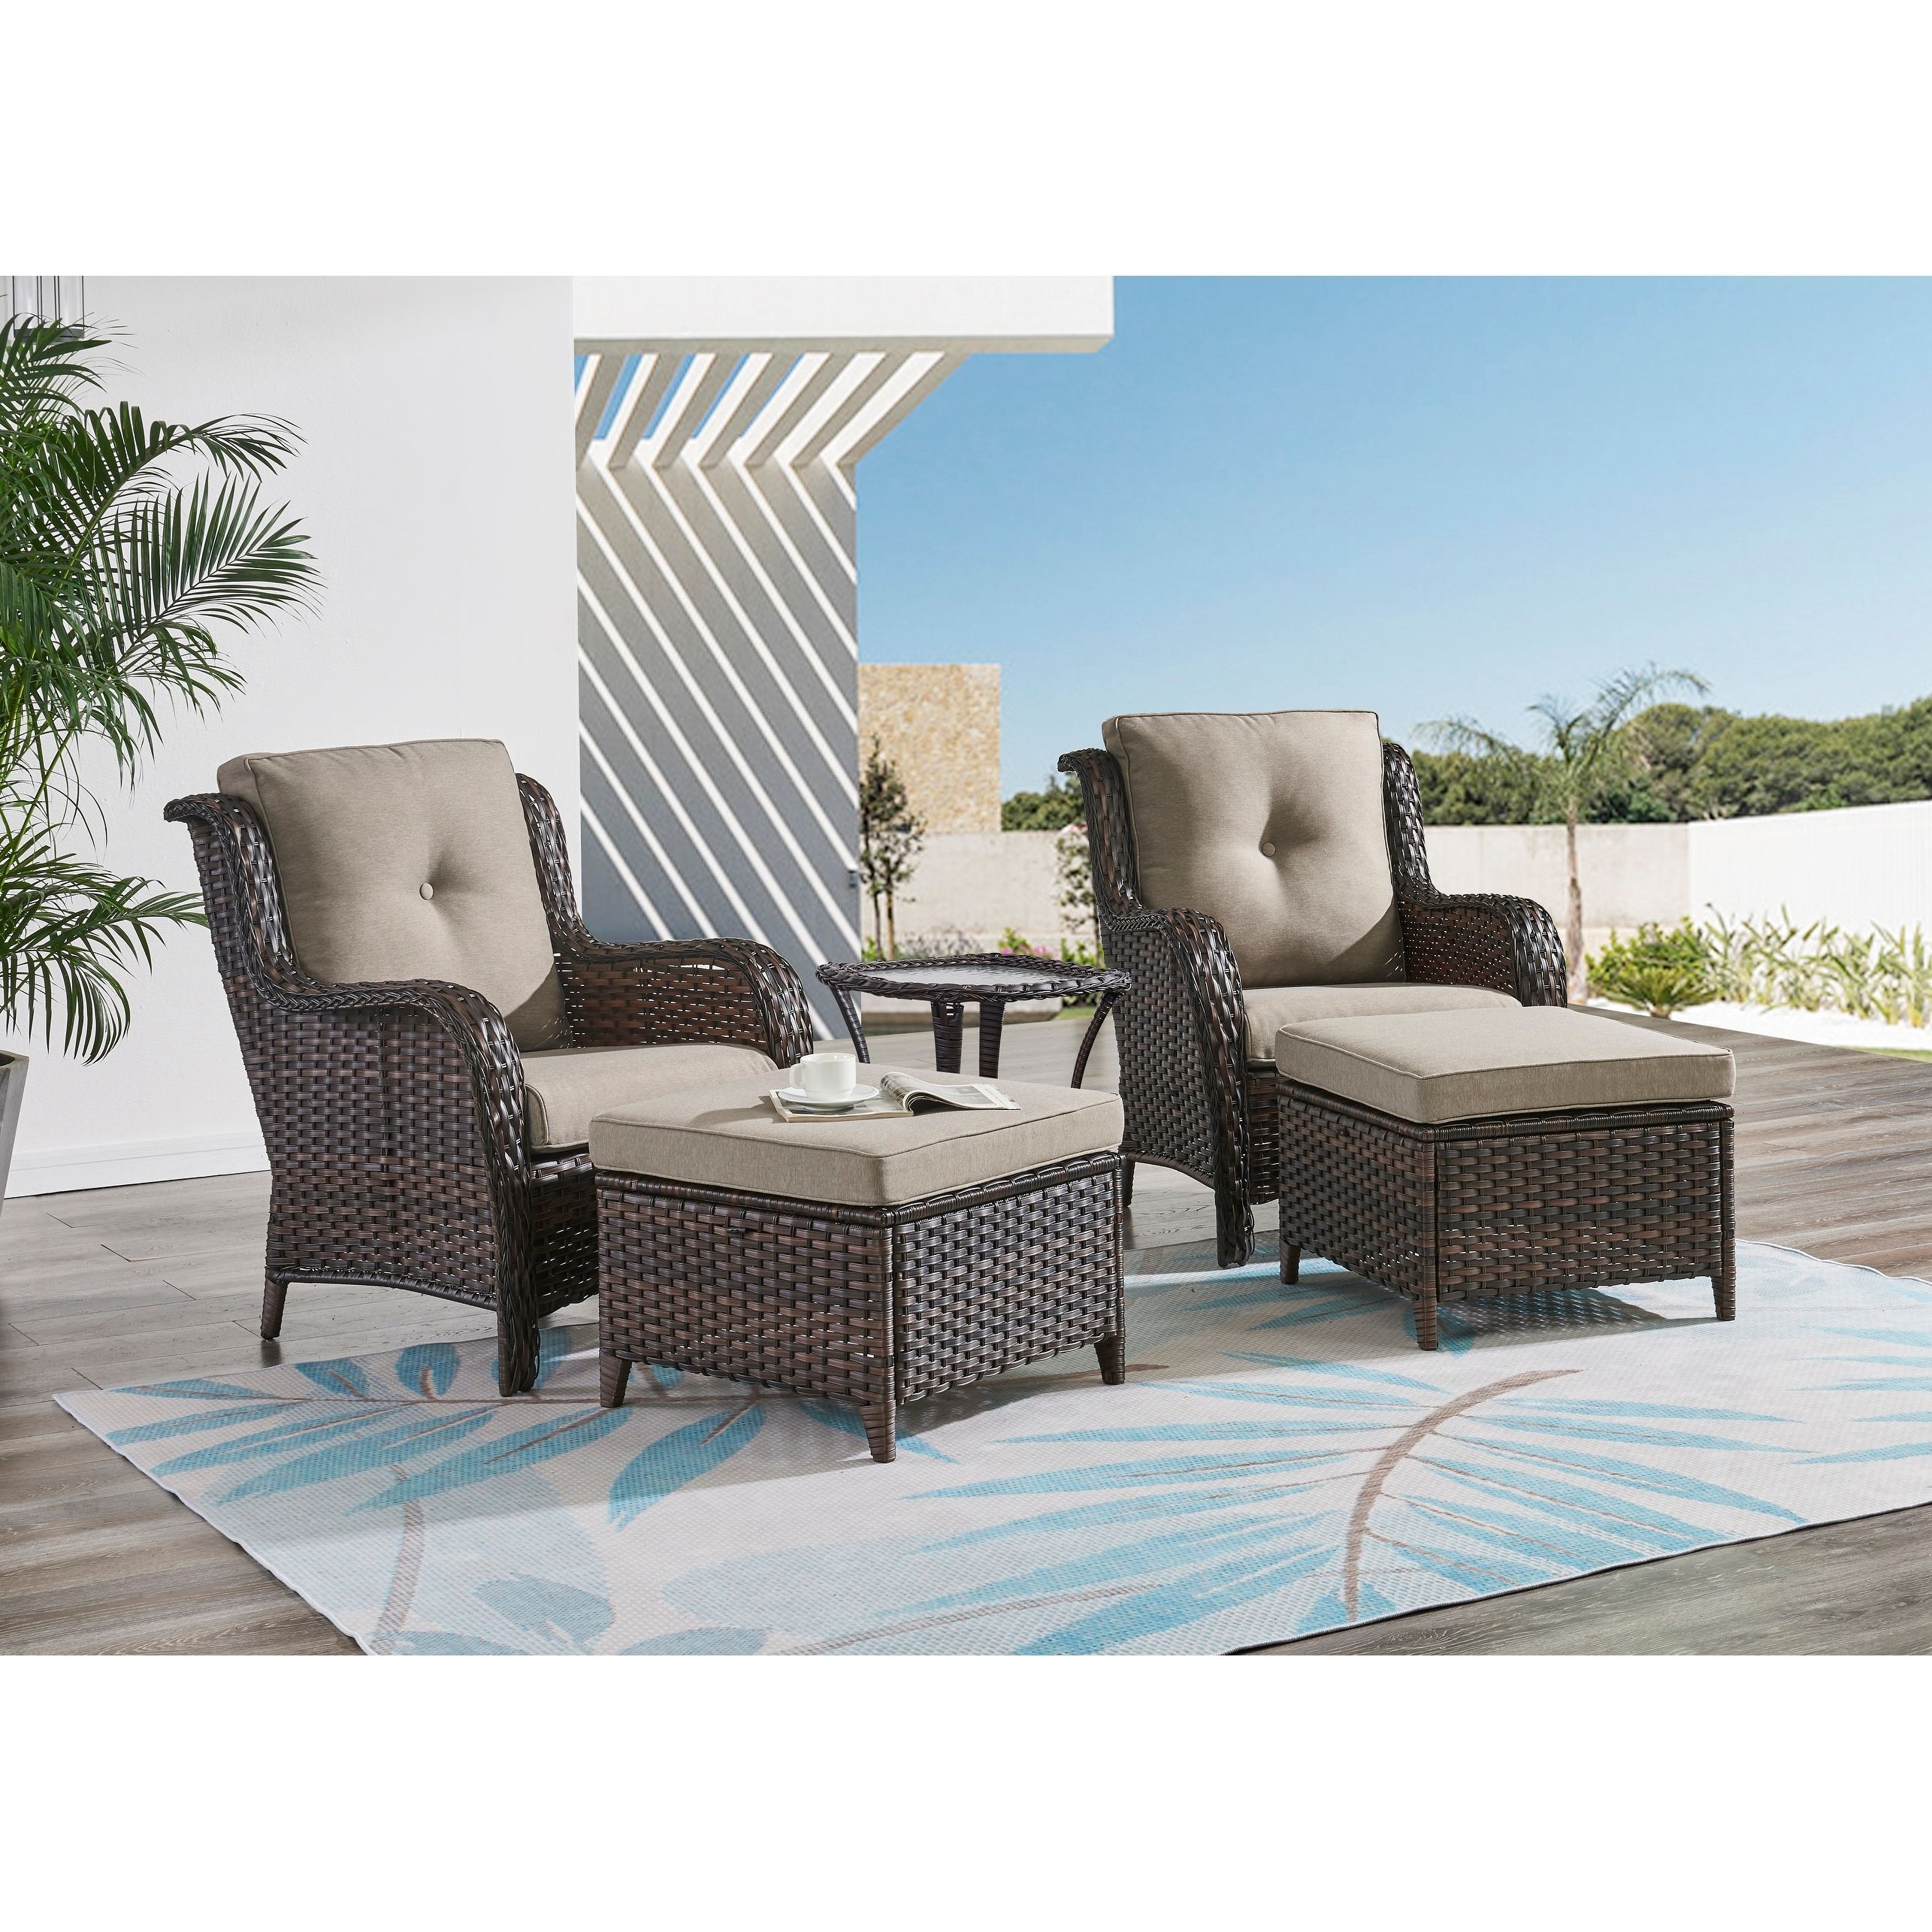 Rilyson 5 Piece Patio Furniture Wicker Chairs With Ottomans & Table – On  Sale – – 36294317 Intended For Ottomans Patio Furniture Set (View 10 of 15)